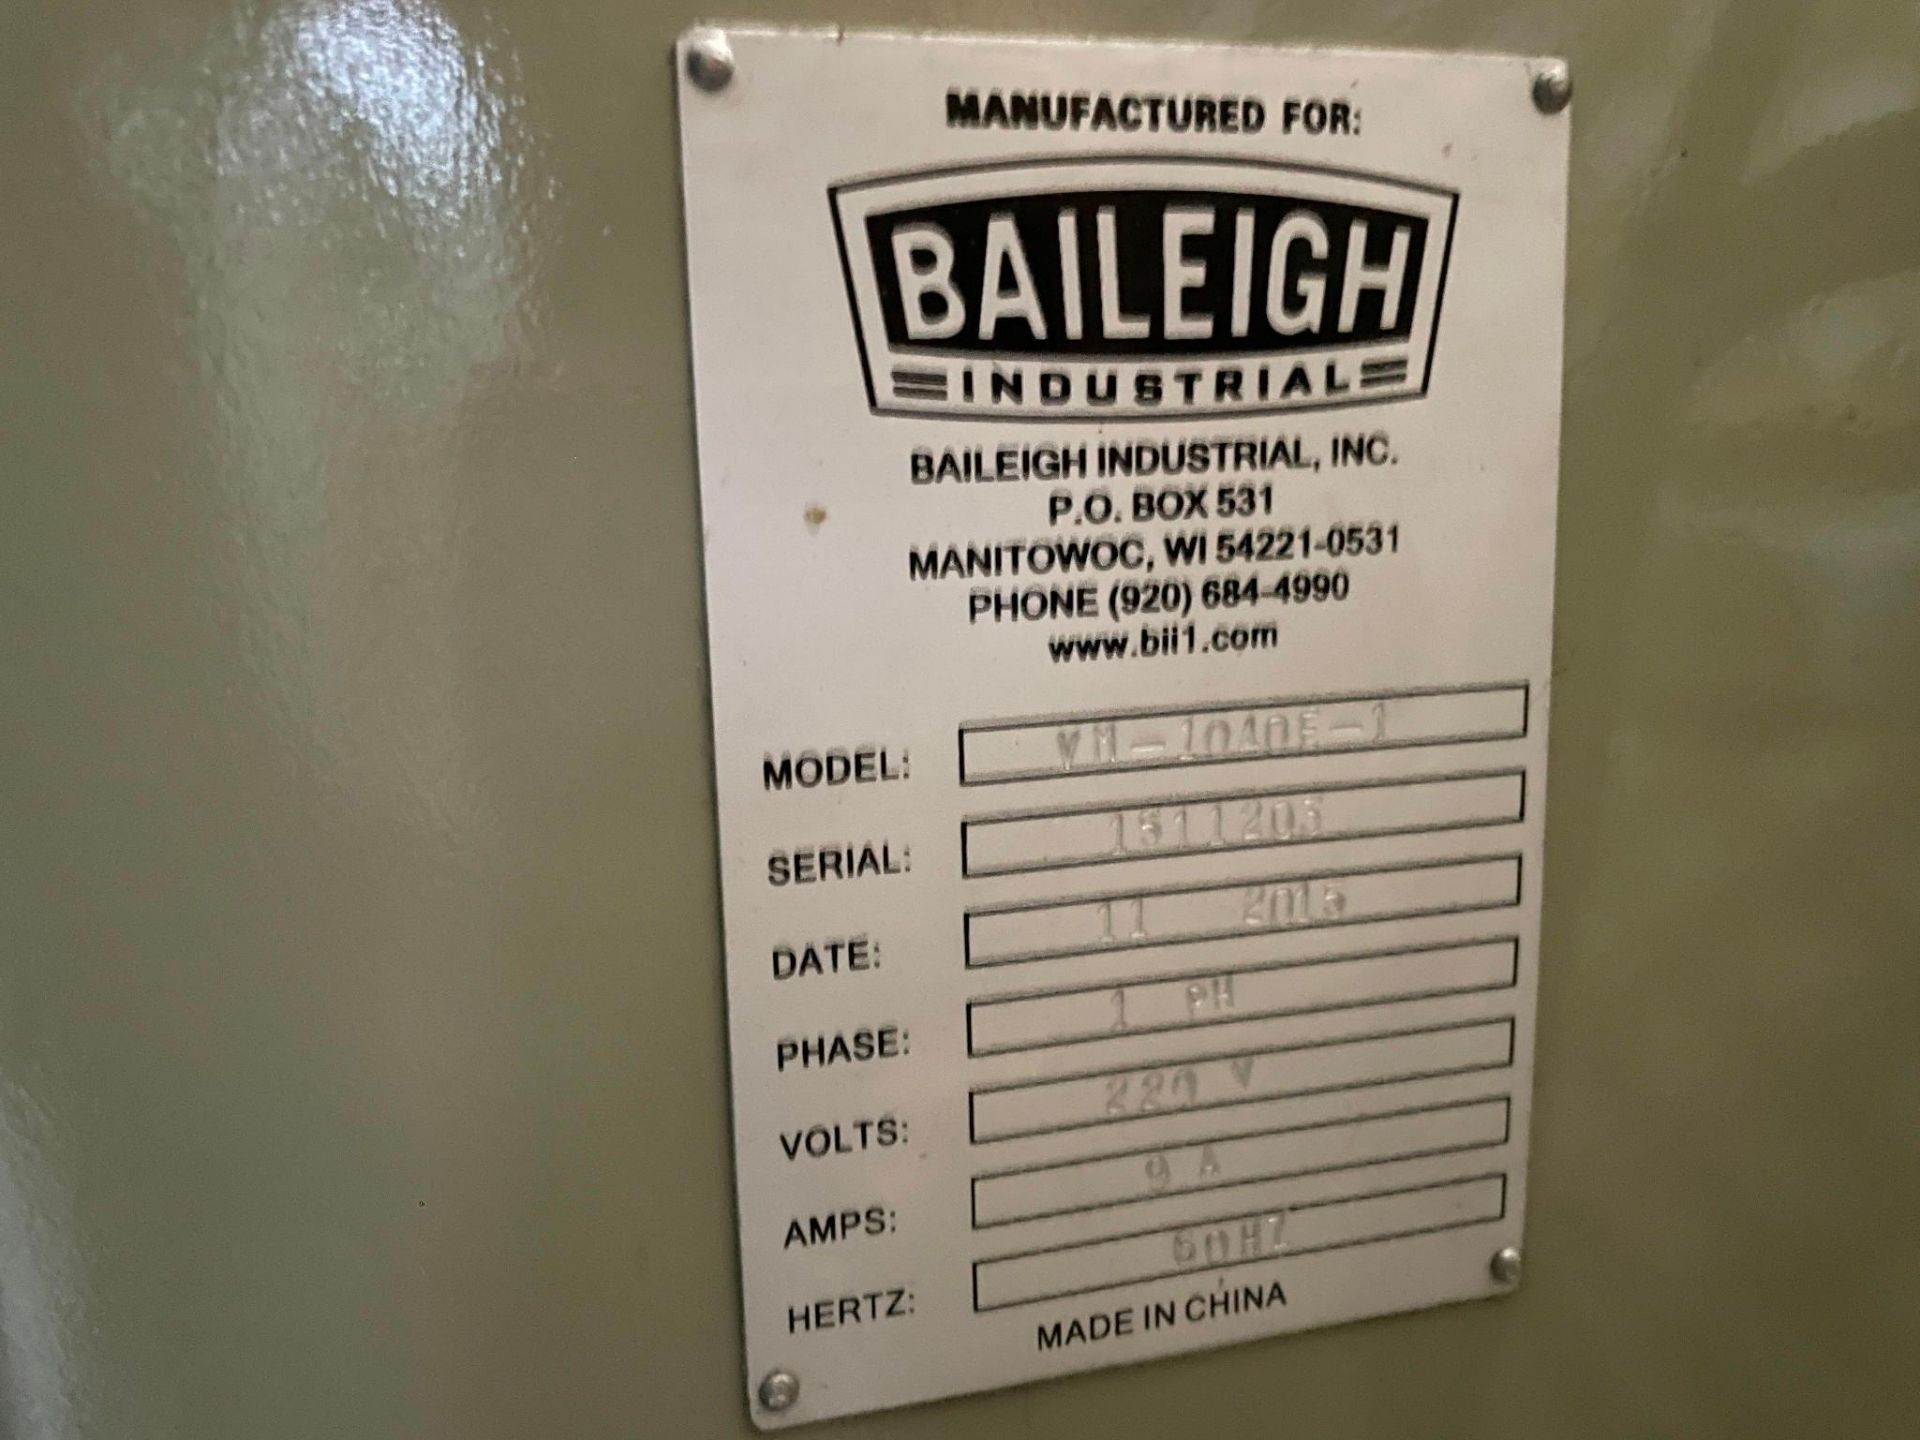 BAILEIGH VM-1040E-1 MILLING MACHINE 10"X40" TABLE, YEAR 2016 - Image 10 of 12